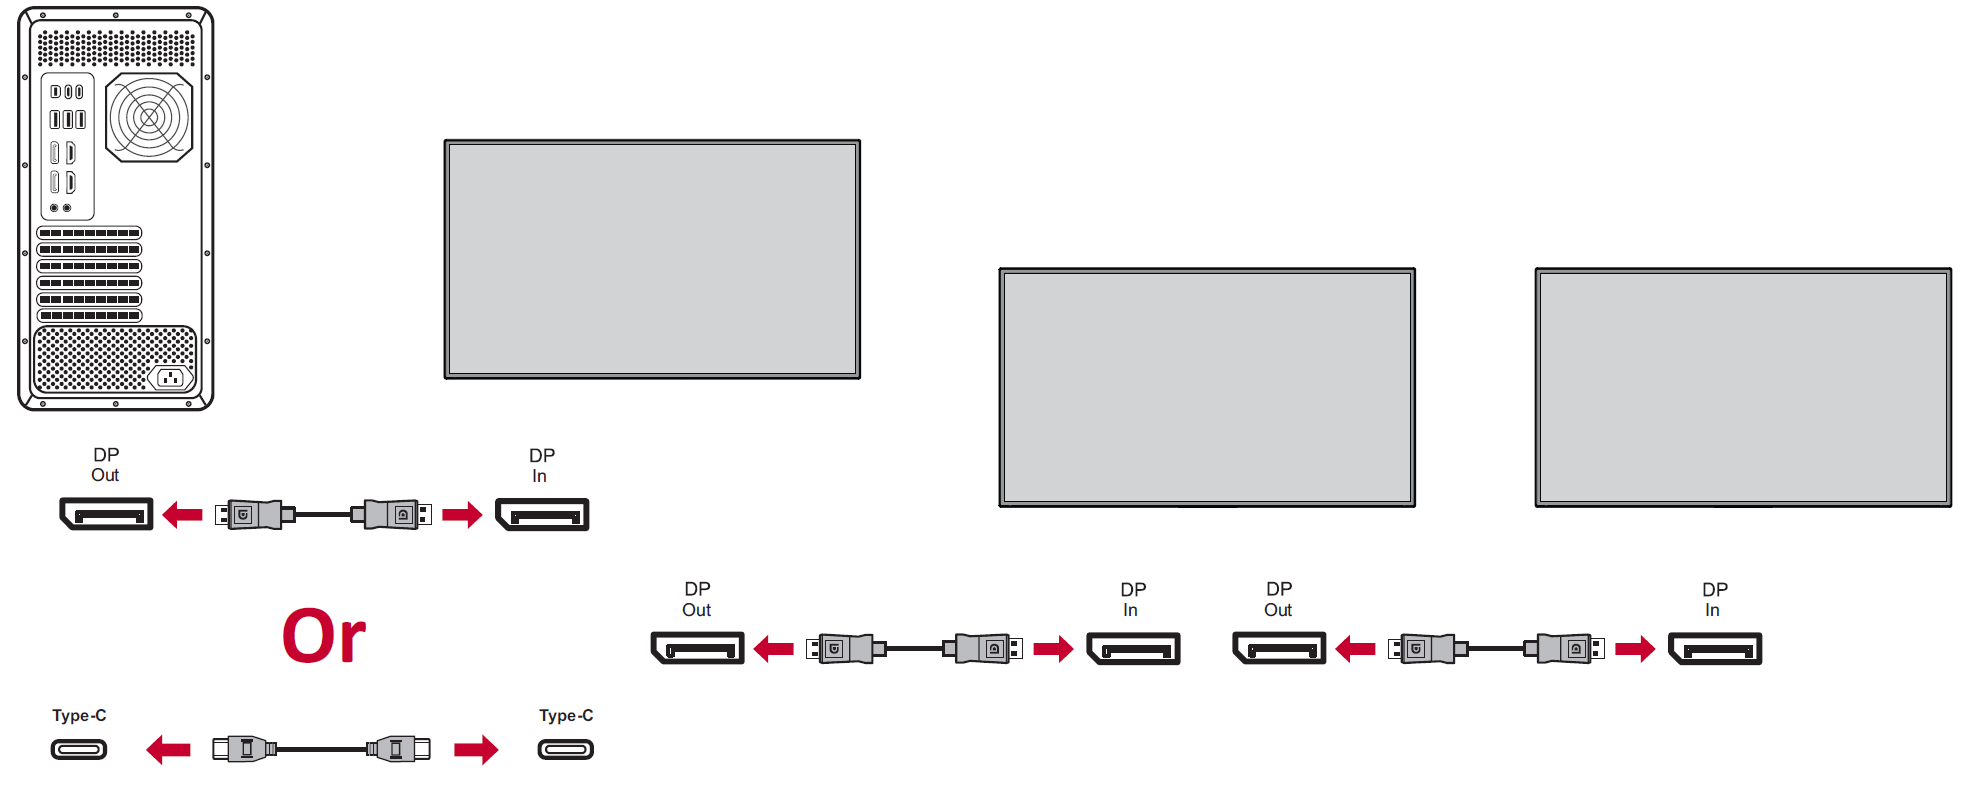 File:VP2468a H2 Daisy Chain Connection.png